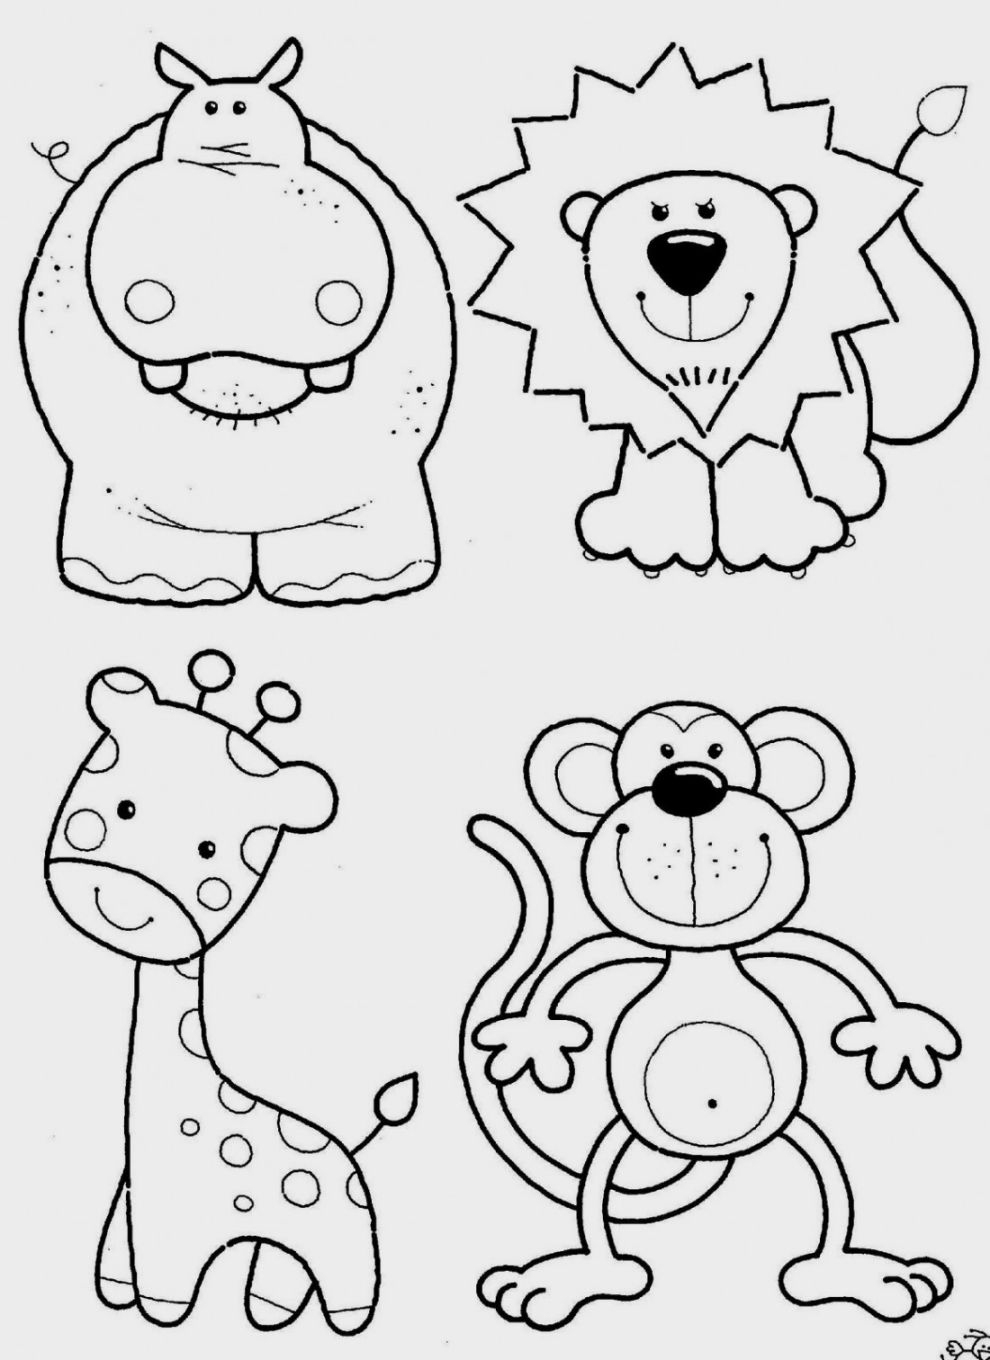 Coloring Pages : Coloring Pages Sheets For Toddlers Largest Free - Free Printable Coloring Pages For Toddlers